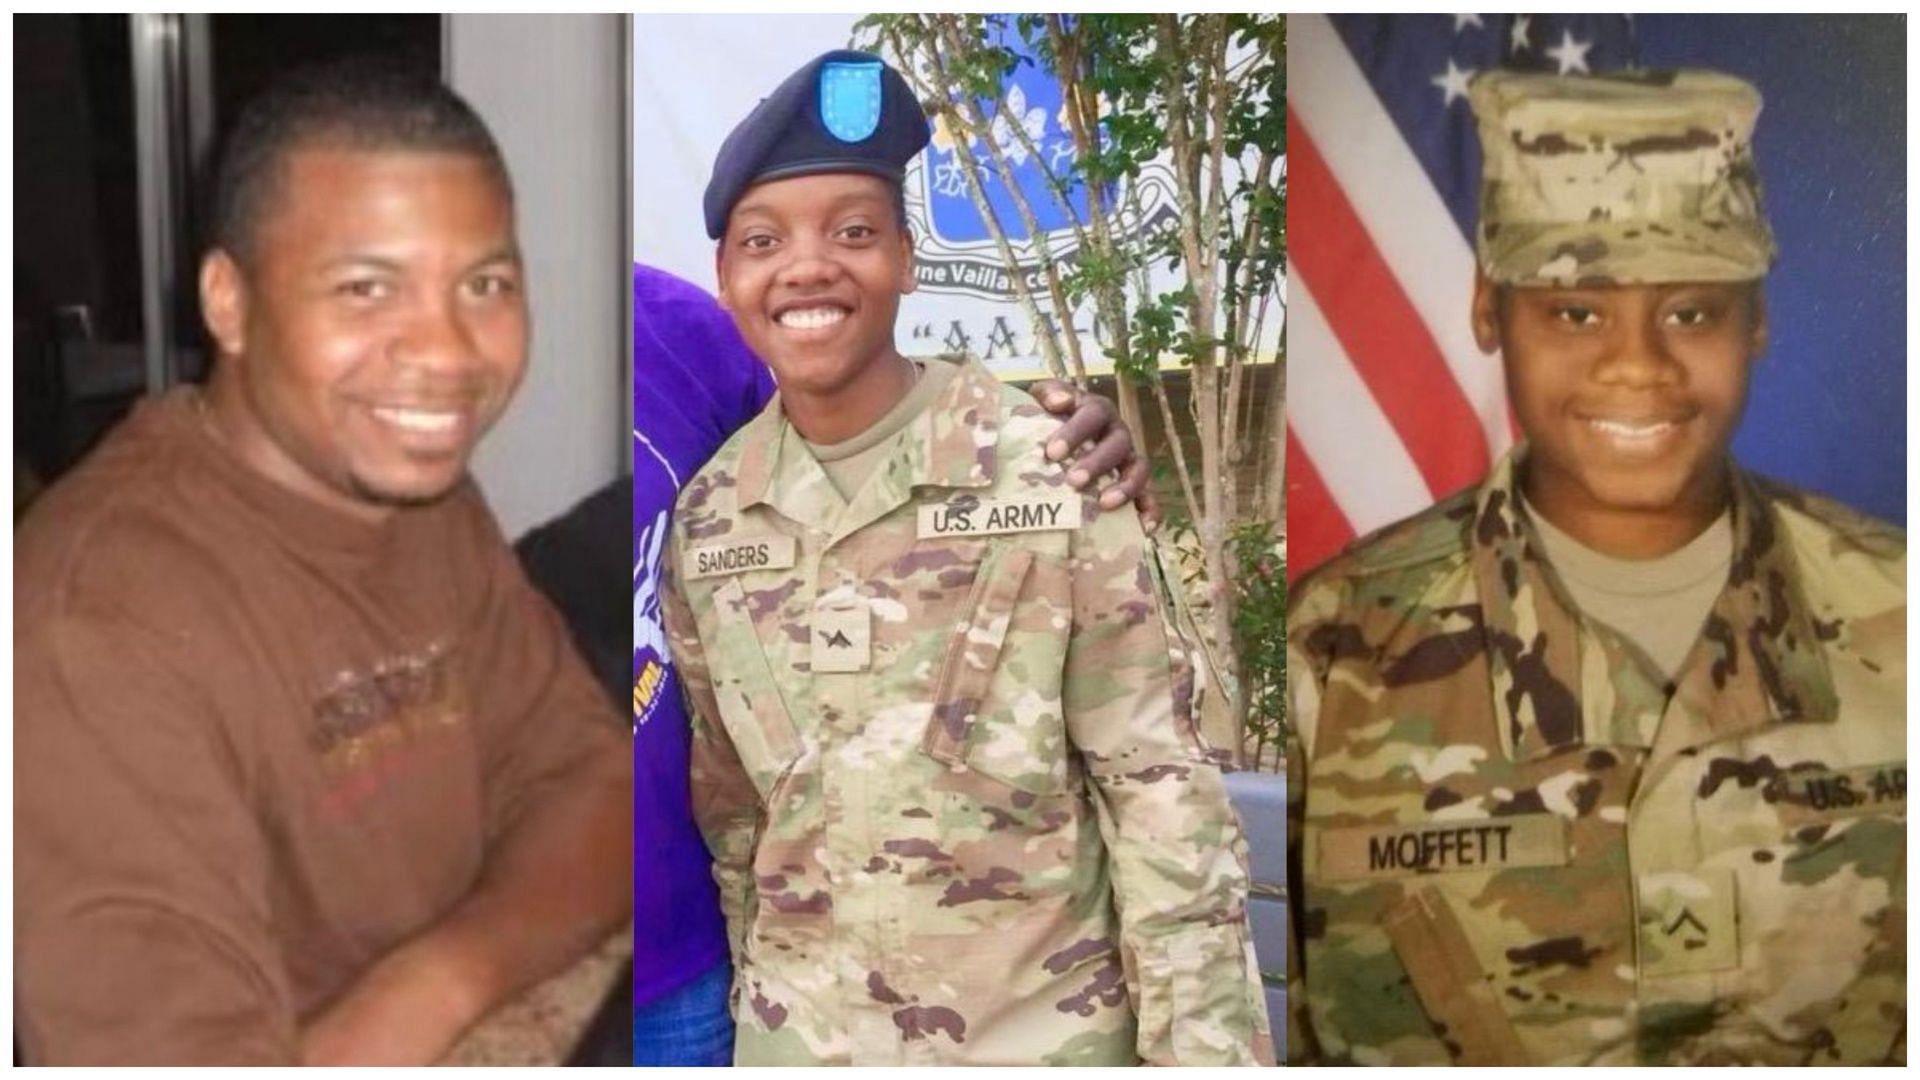 Pentagon releases the identities of the service members killed in the Jordan drone attack (Image via X/@bennyjohnson)